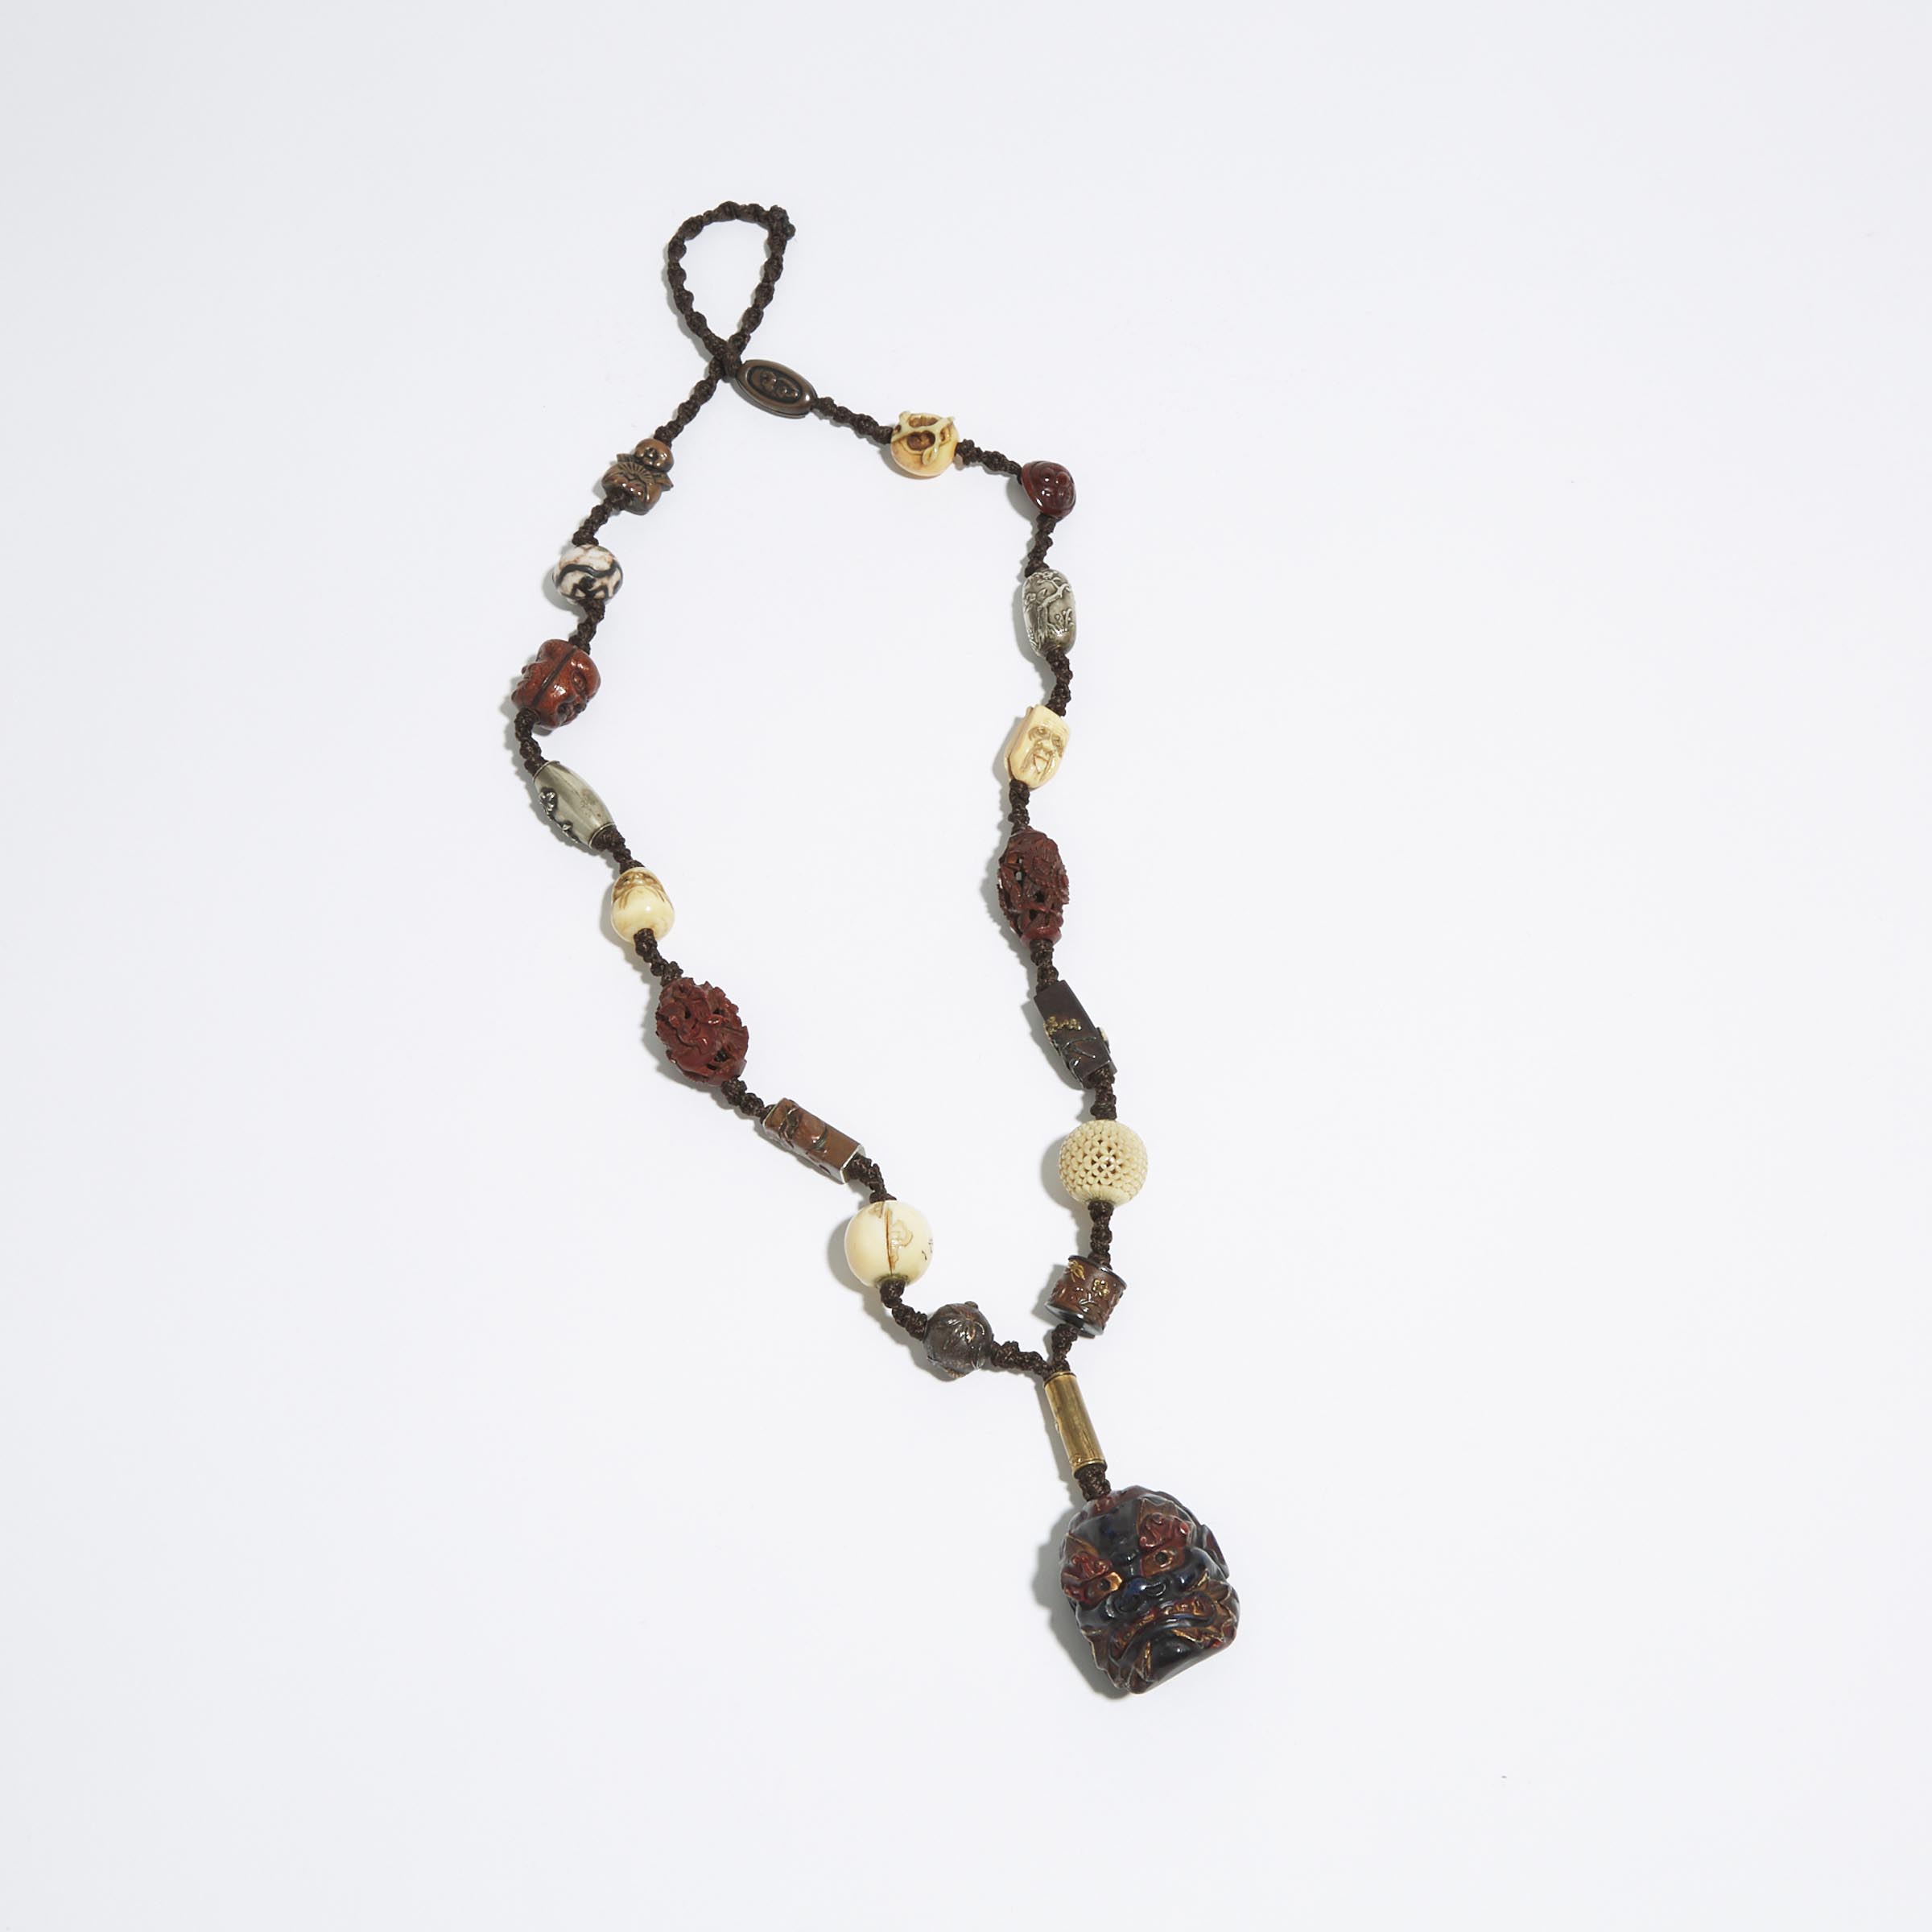 A Netsuke and Ojime Beaded Necklace, 19th Century